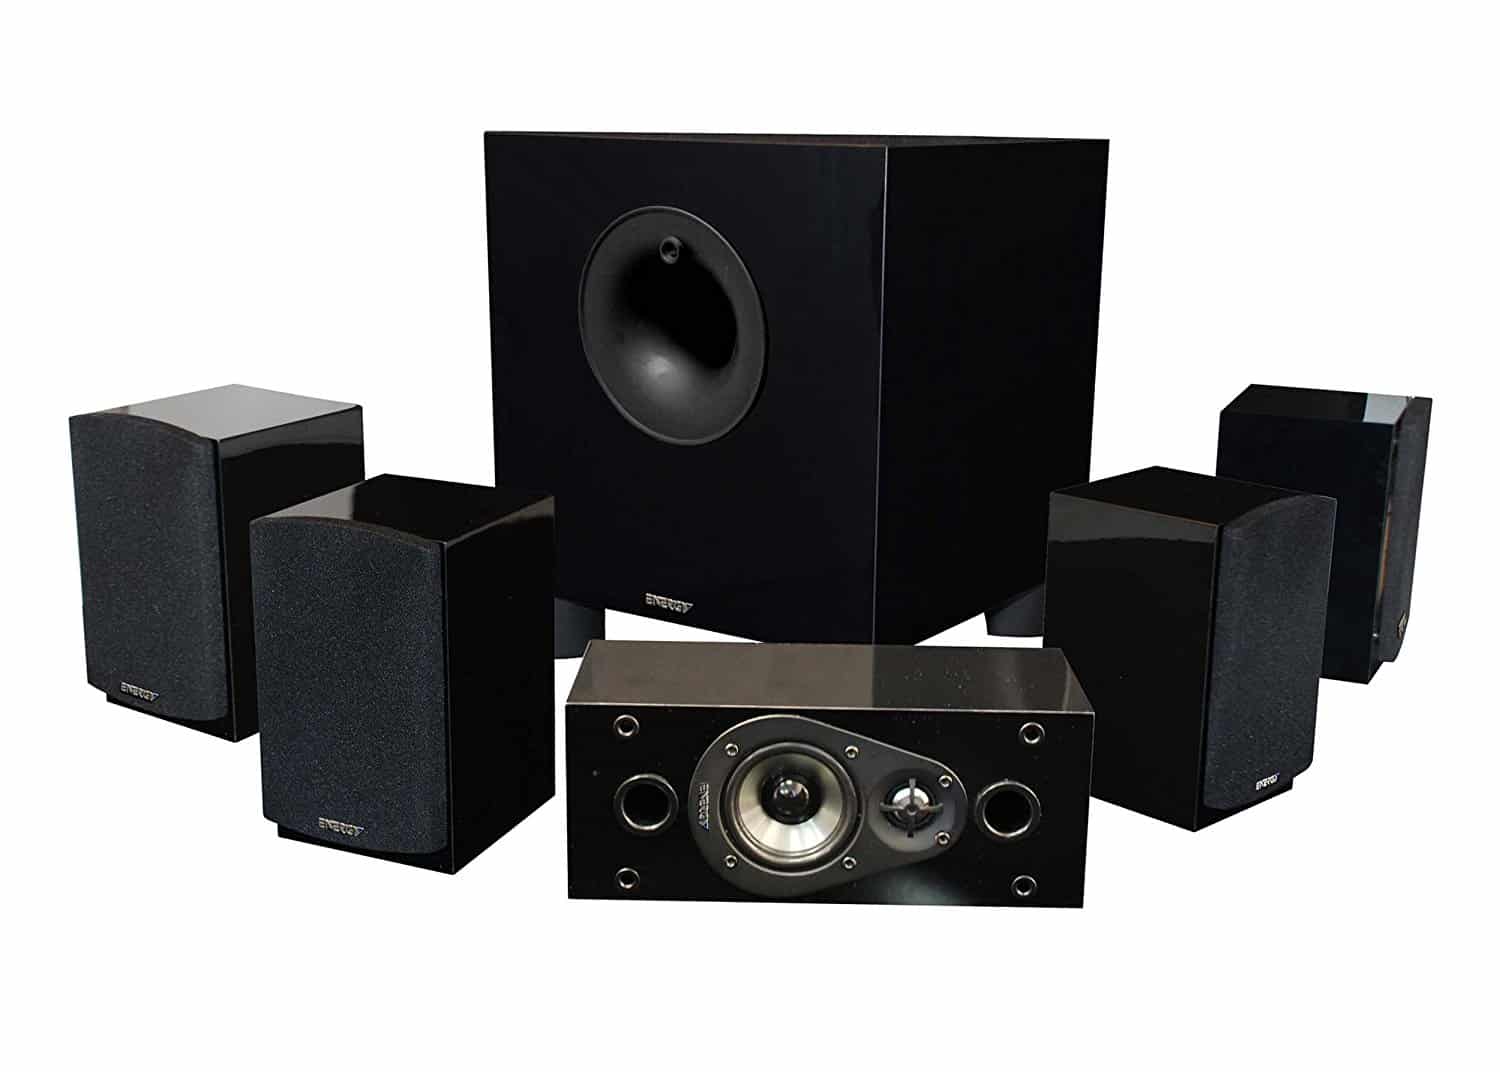 Top 10 Best Home Theater Speakers in 2020 Reviews | Buyer's Guide